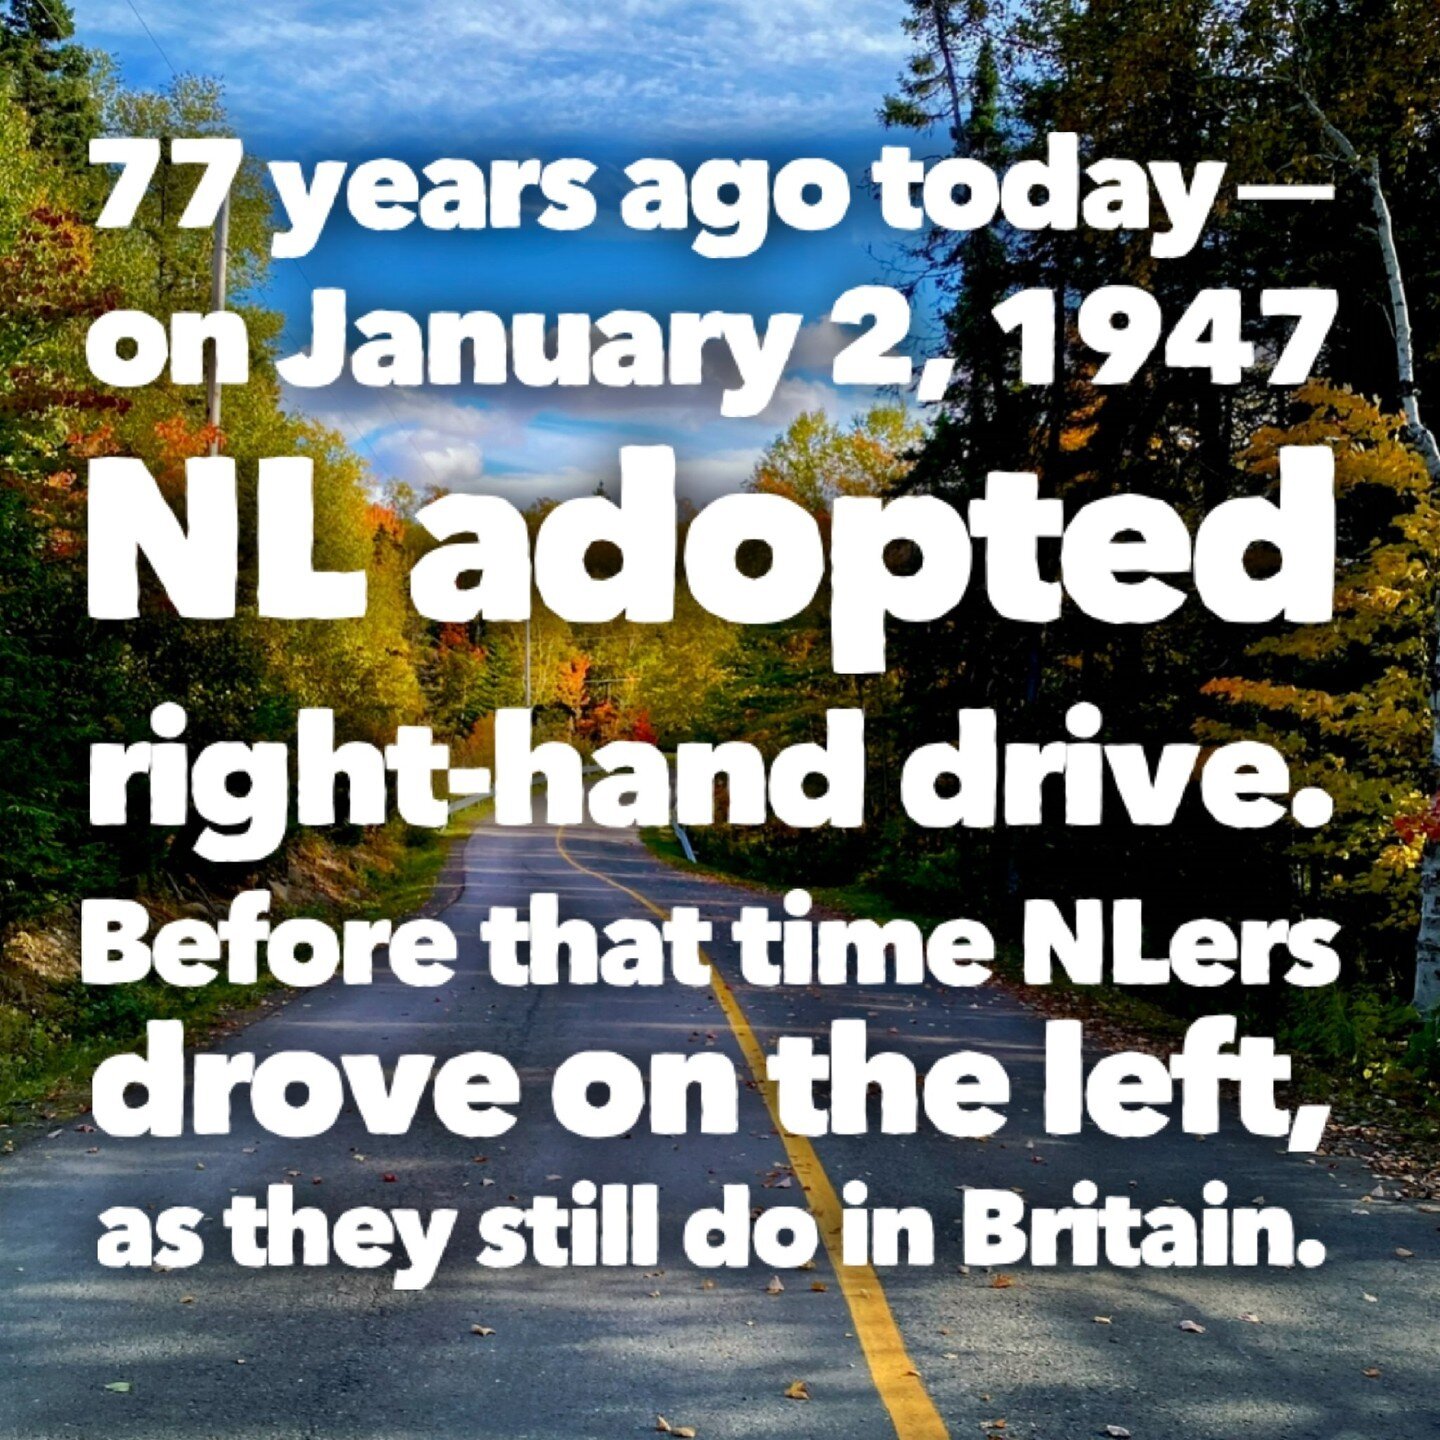 77 years ago today -- On January 2nd, 1947, NL adopted right-hand drive. Prior to 1947 traffic drove to the left, as they still do in the UK. #newfoundland

Read more: https://buff.ly/3S271By